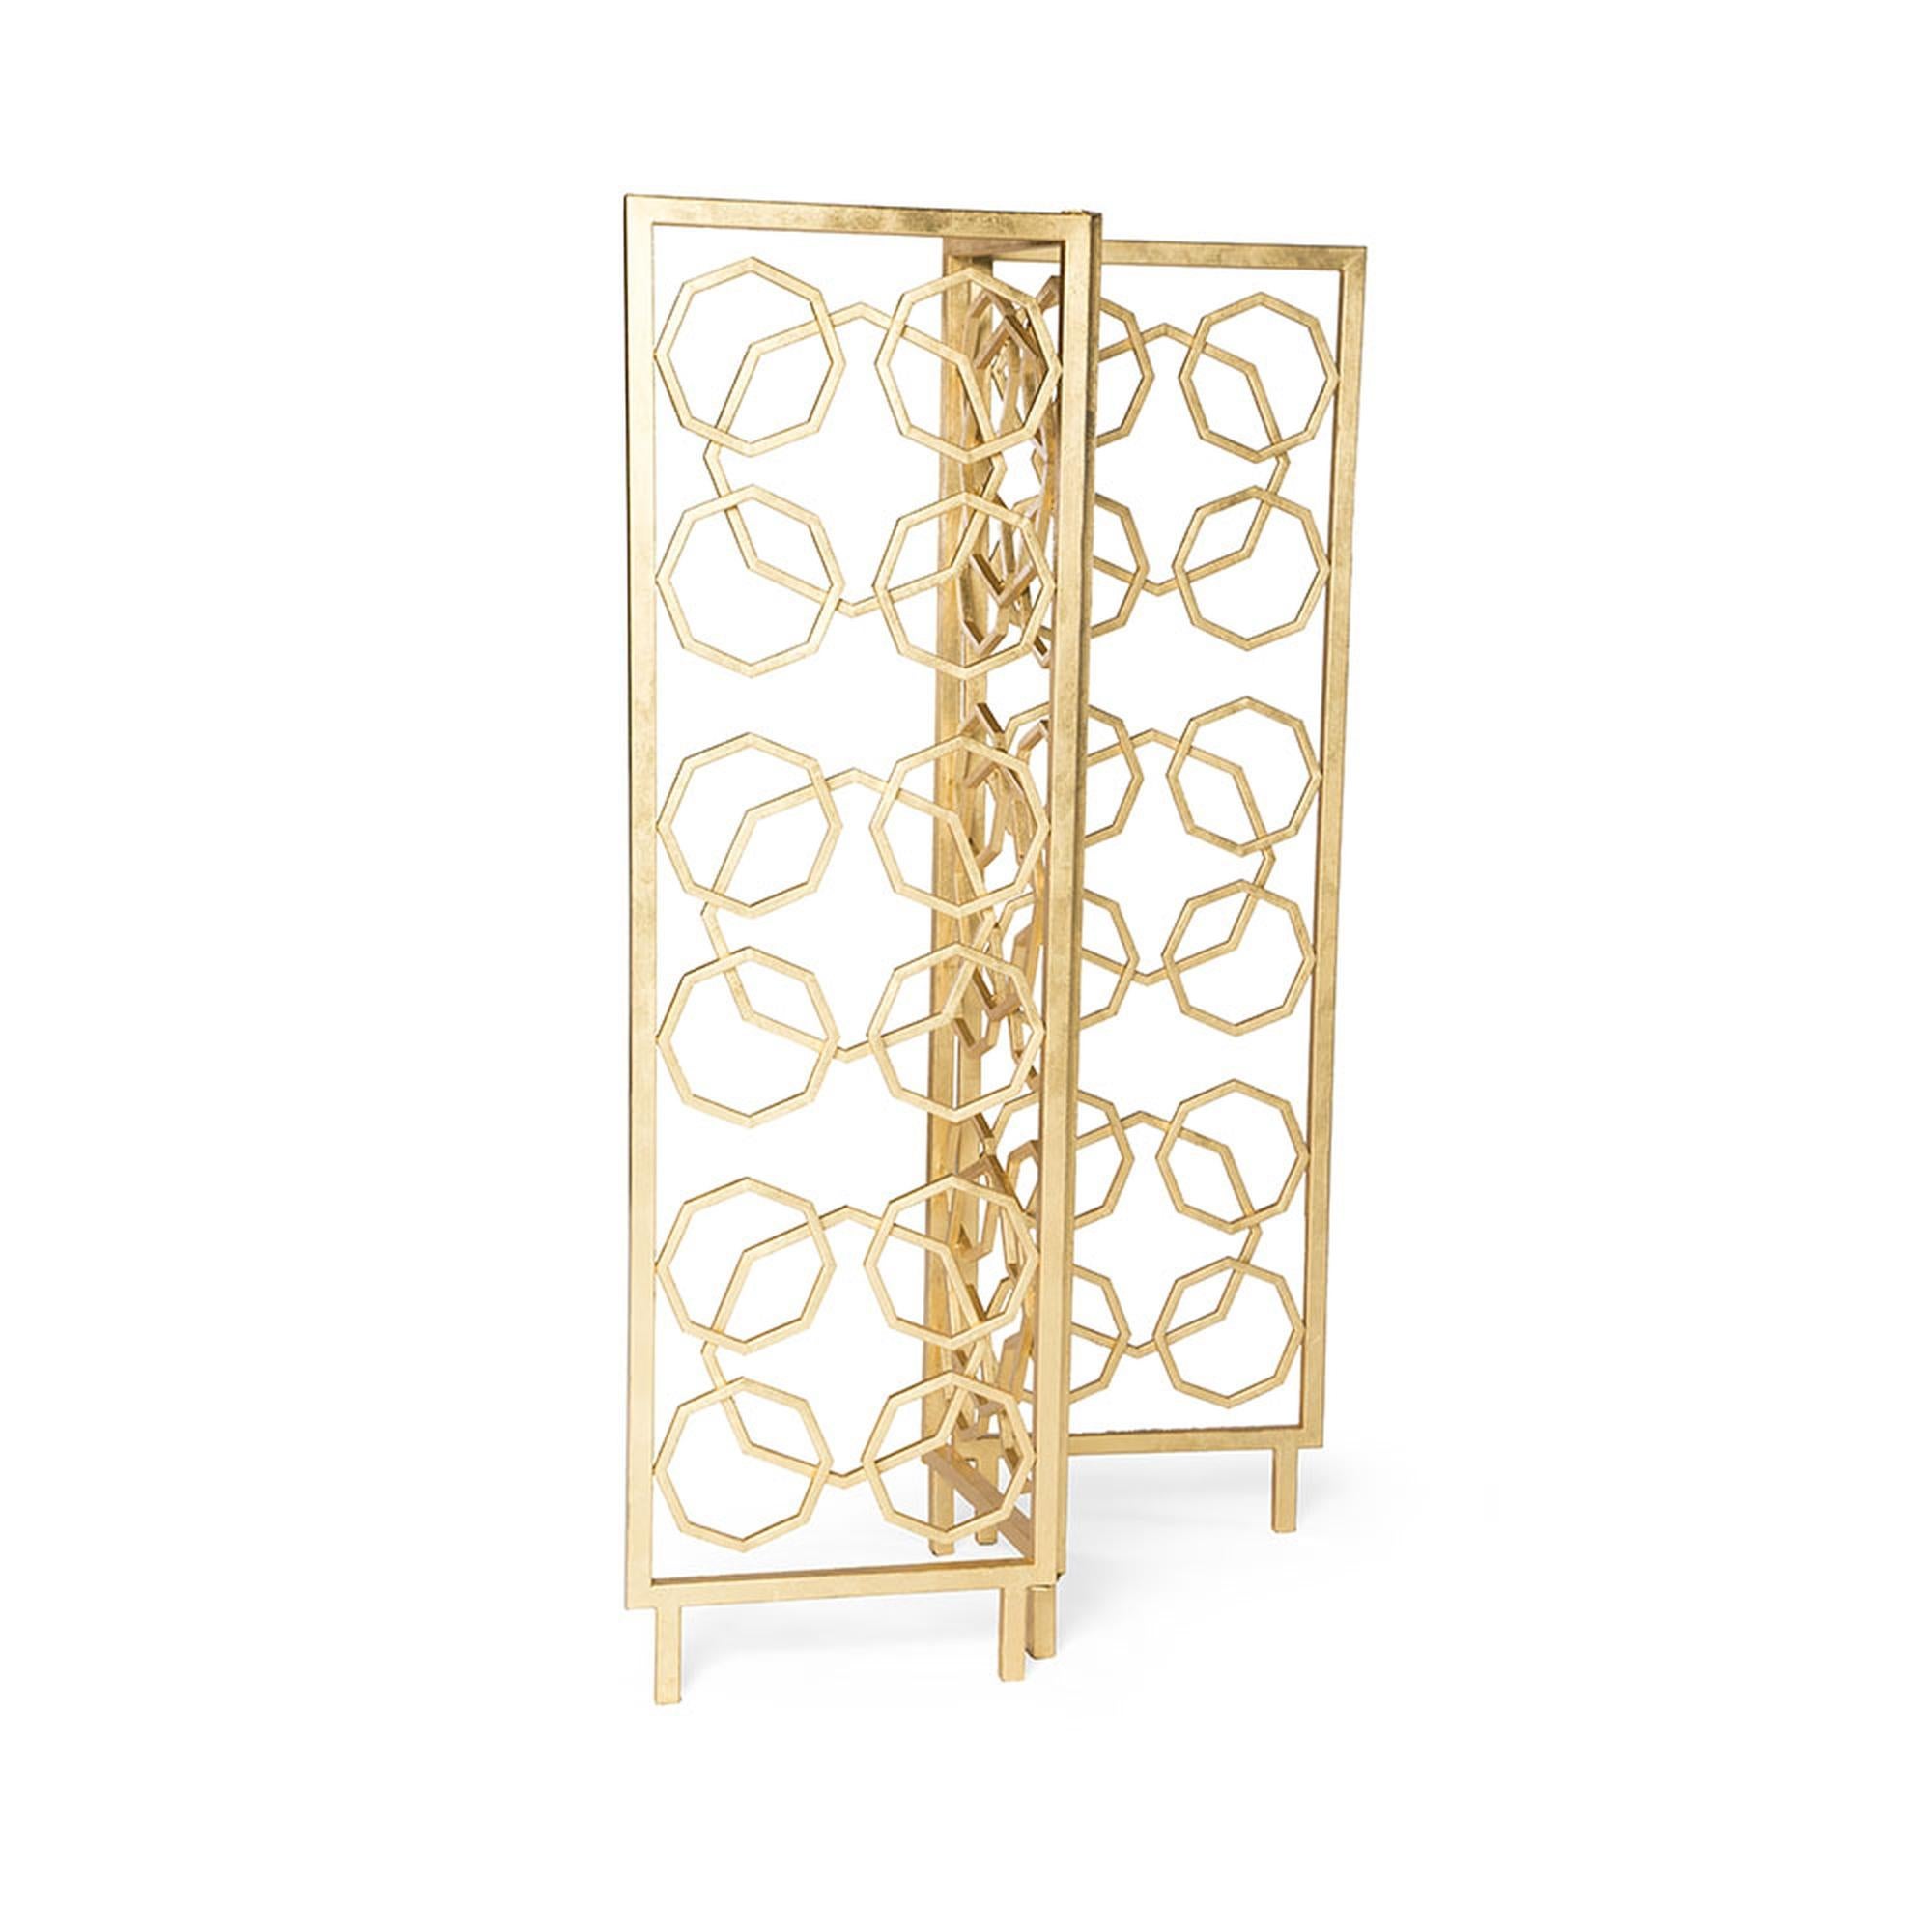 The sophisticated, hand gilded Casablanca room screen is perfect to elegantly divide an area while adding design to a space. This one-of-a-kind room divider showcases dimensional design and originality with its octagonal metal structures. Discreet